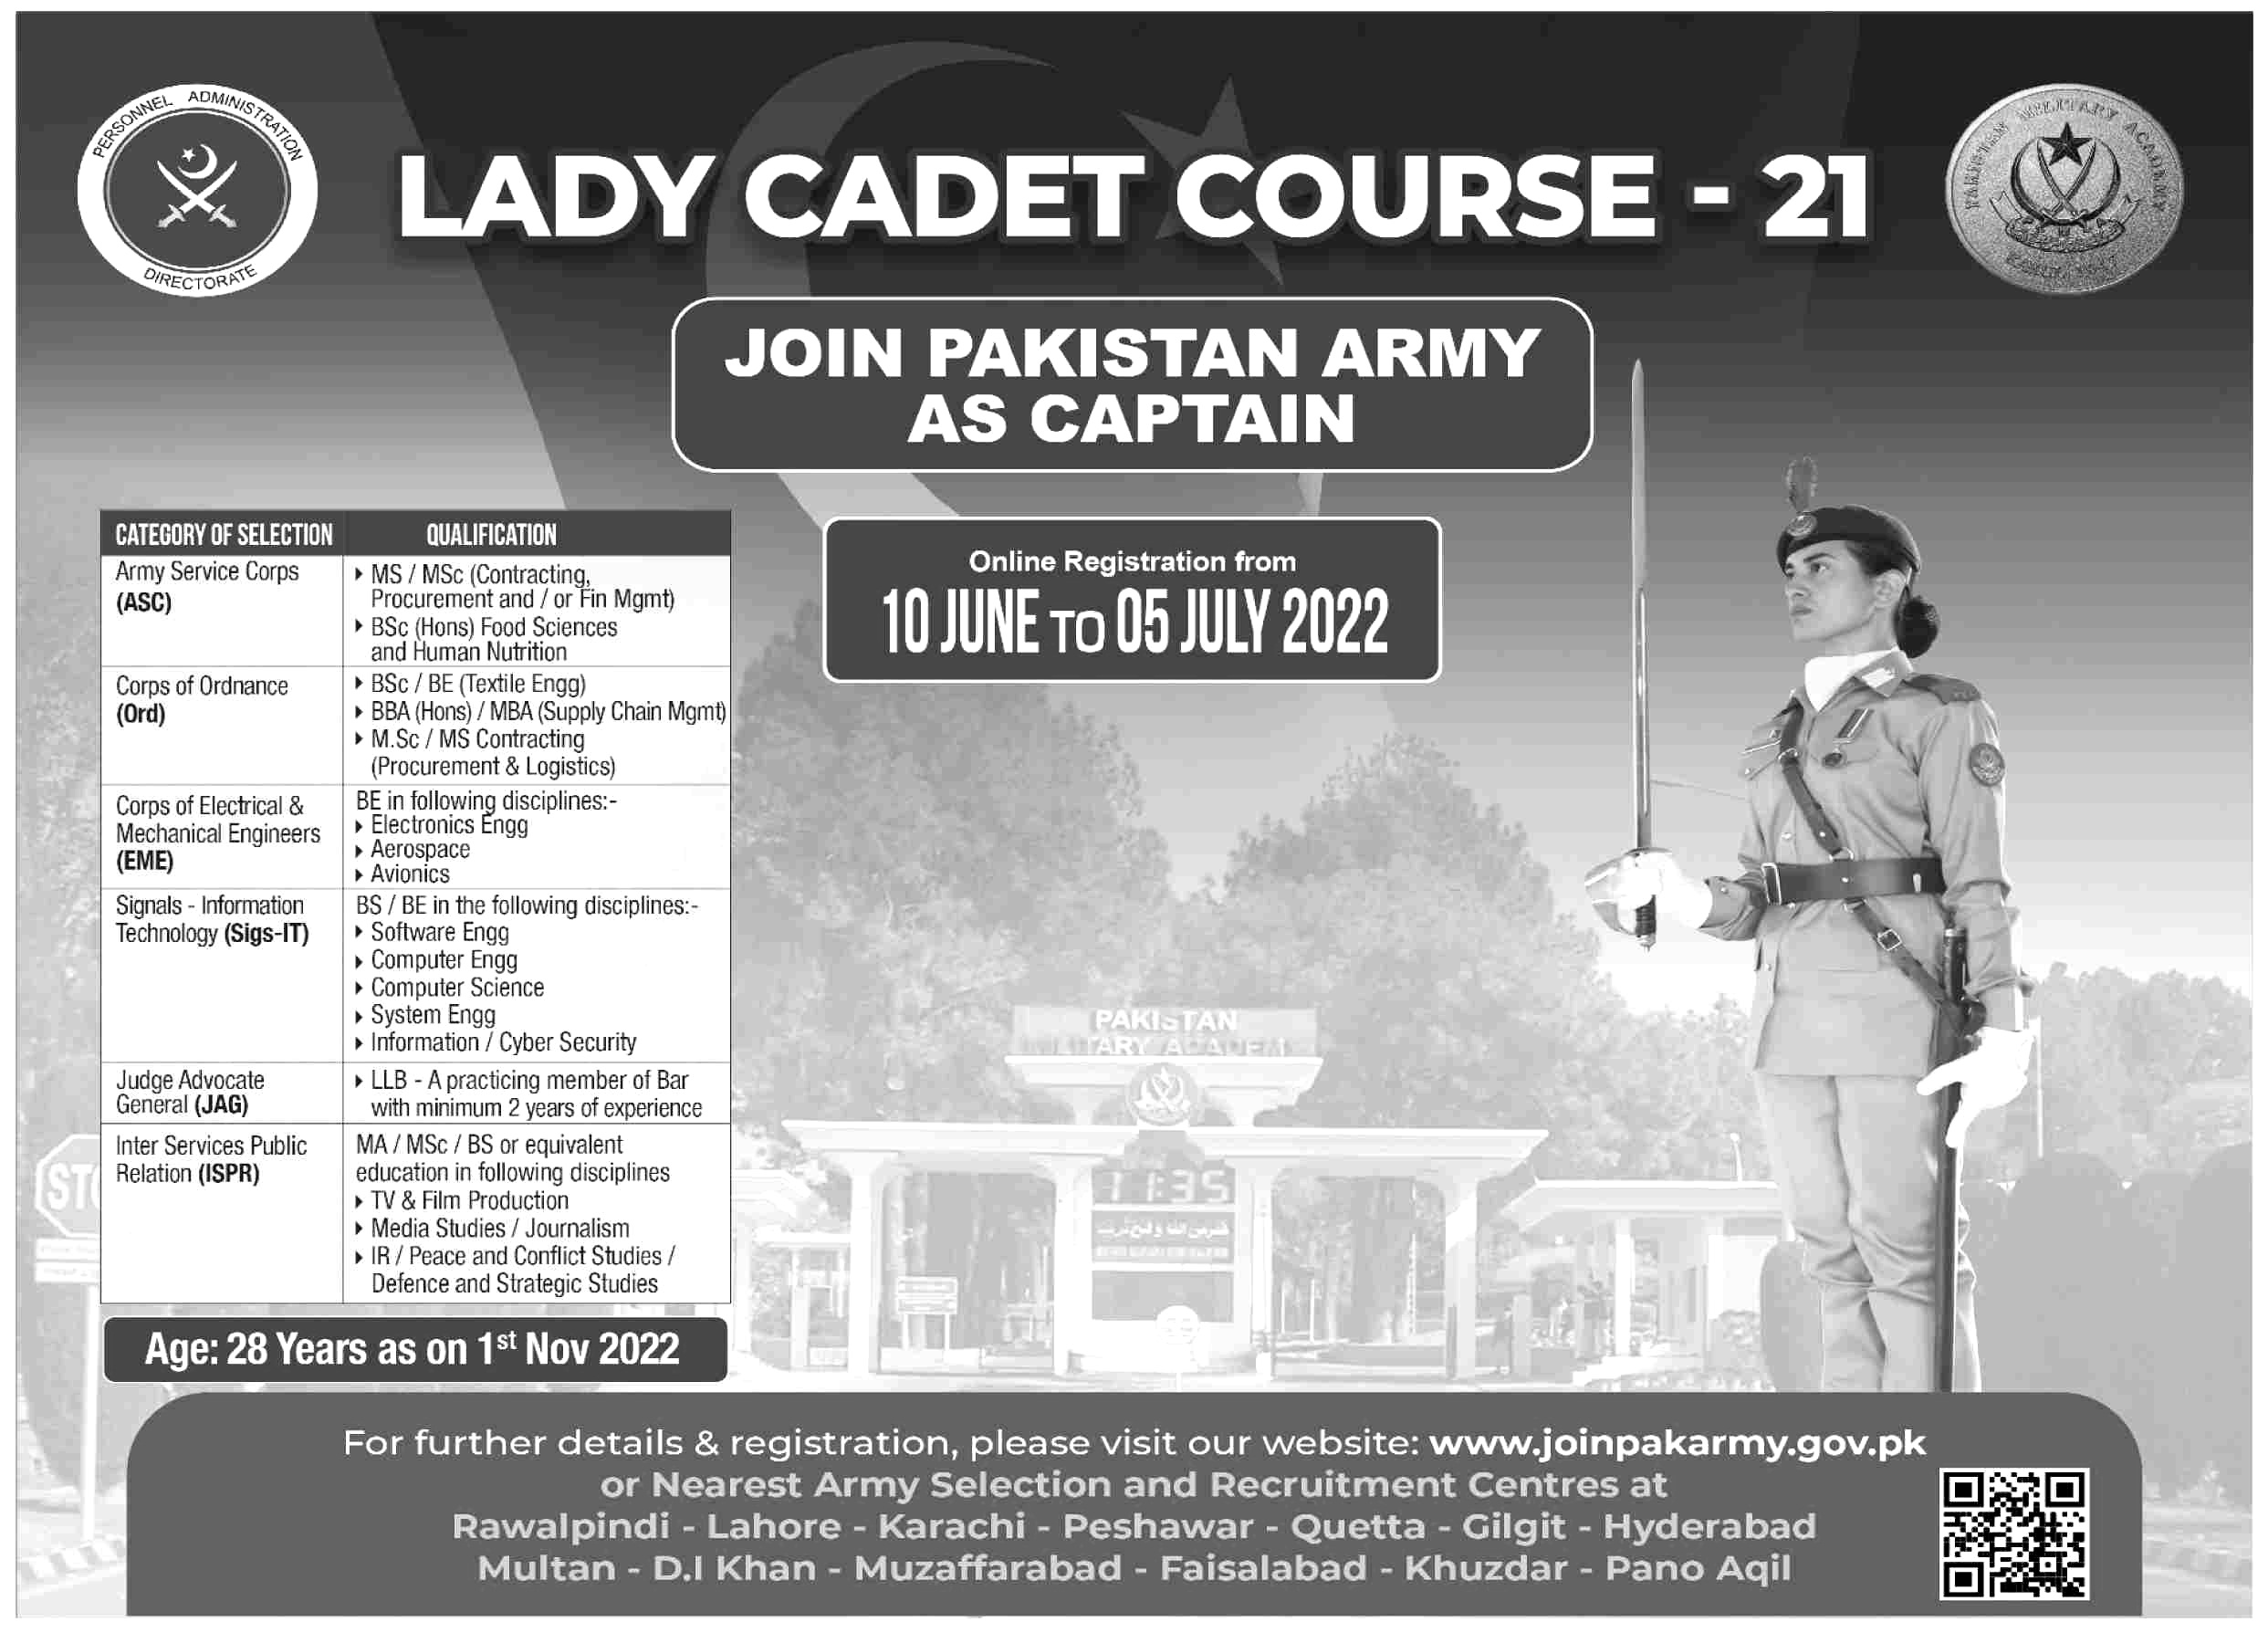 Join Pakistan Army as Captain through Lady Cadet Course 2023 Online Registration